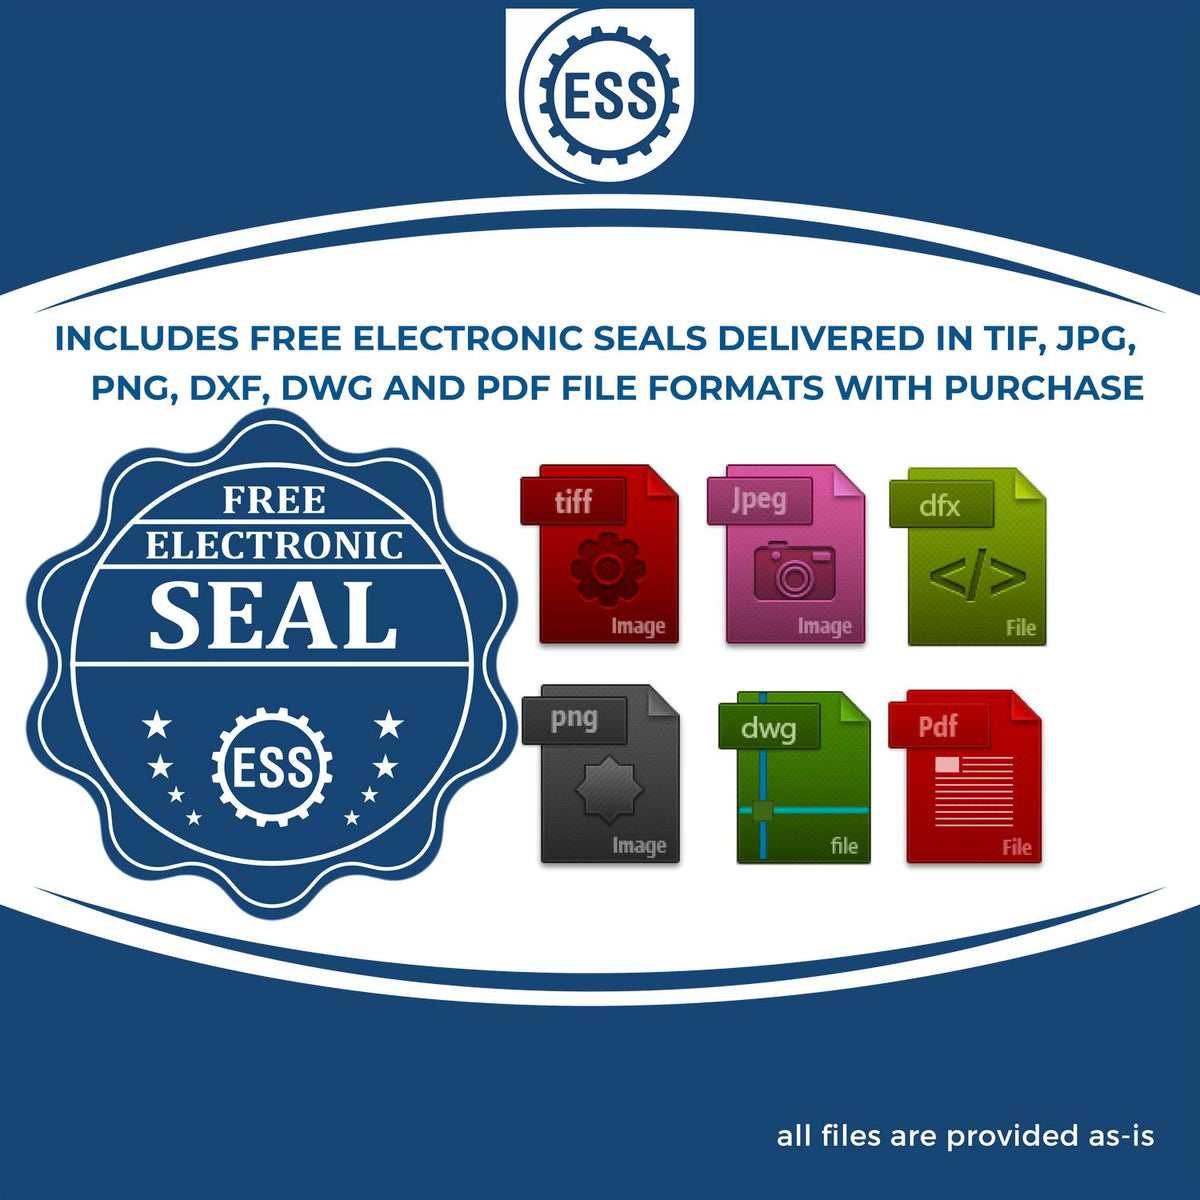 An infographic for the free electronic seal for the Slim Pre-Inked New Jersey Architect Seal Stamp illustrating the different file type icons such as DXF, DWG, TIF, JPG and PNG.